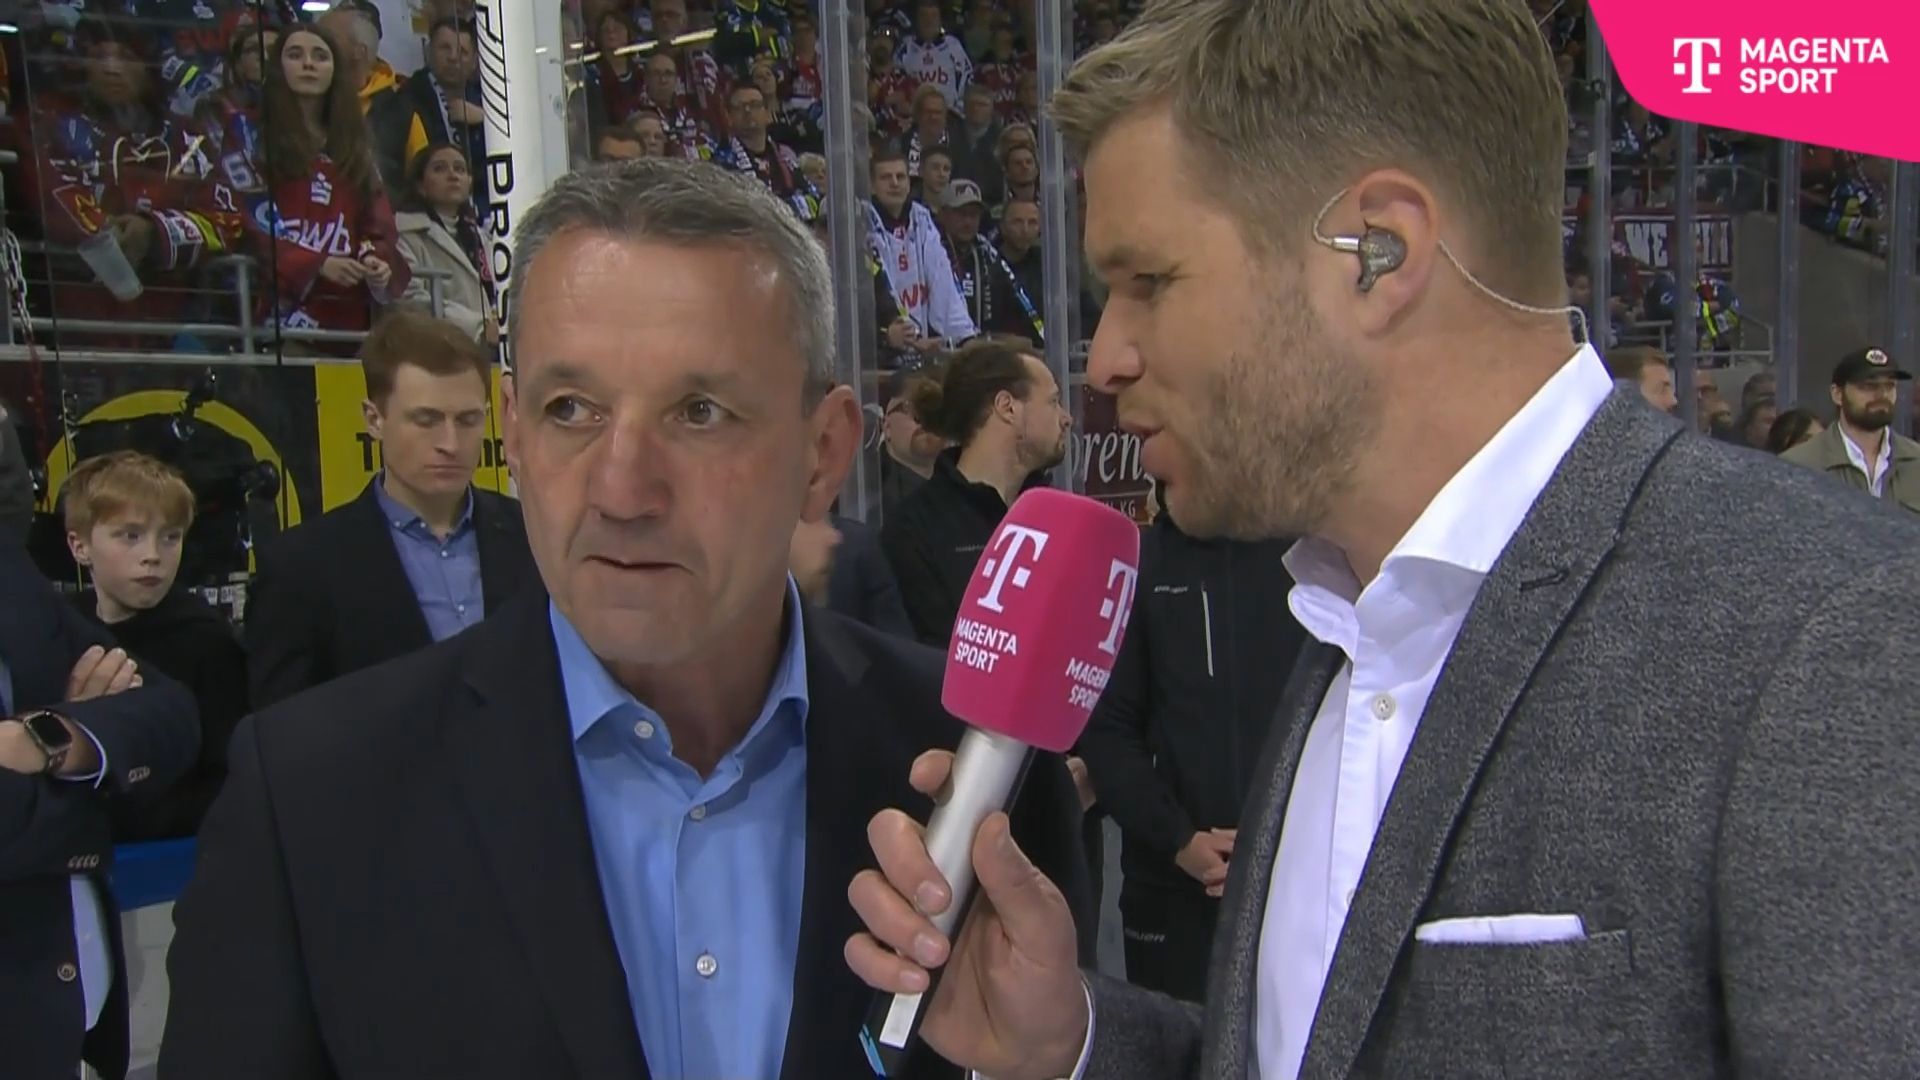 Ice hockey: Bremerhaven coach Thomas Popiesch visibly disappointed after defeat in the final, but also proud